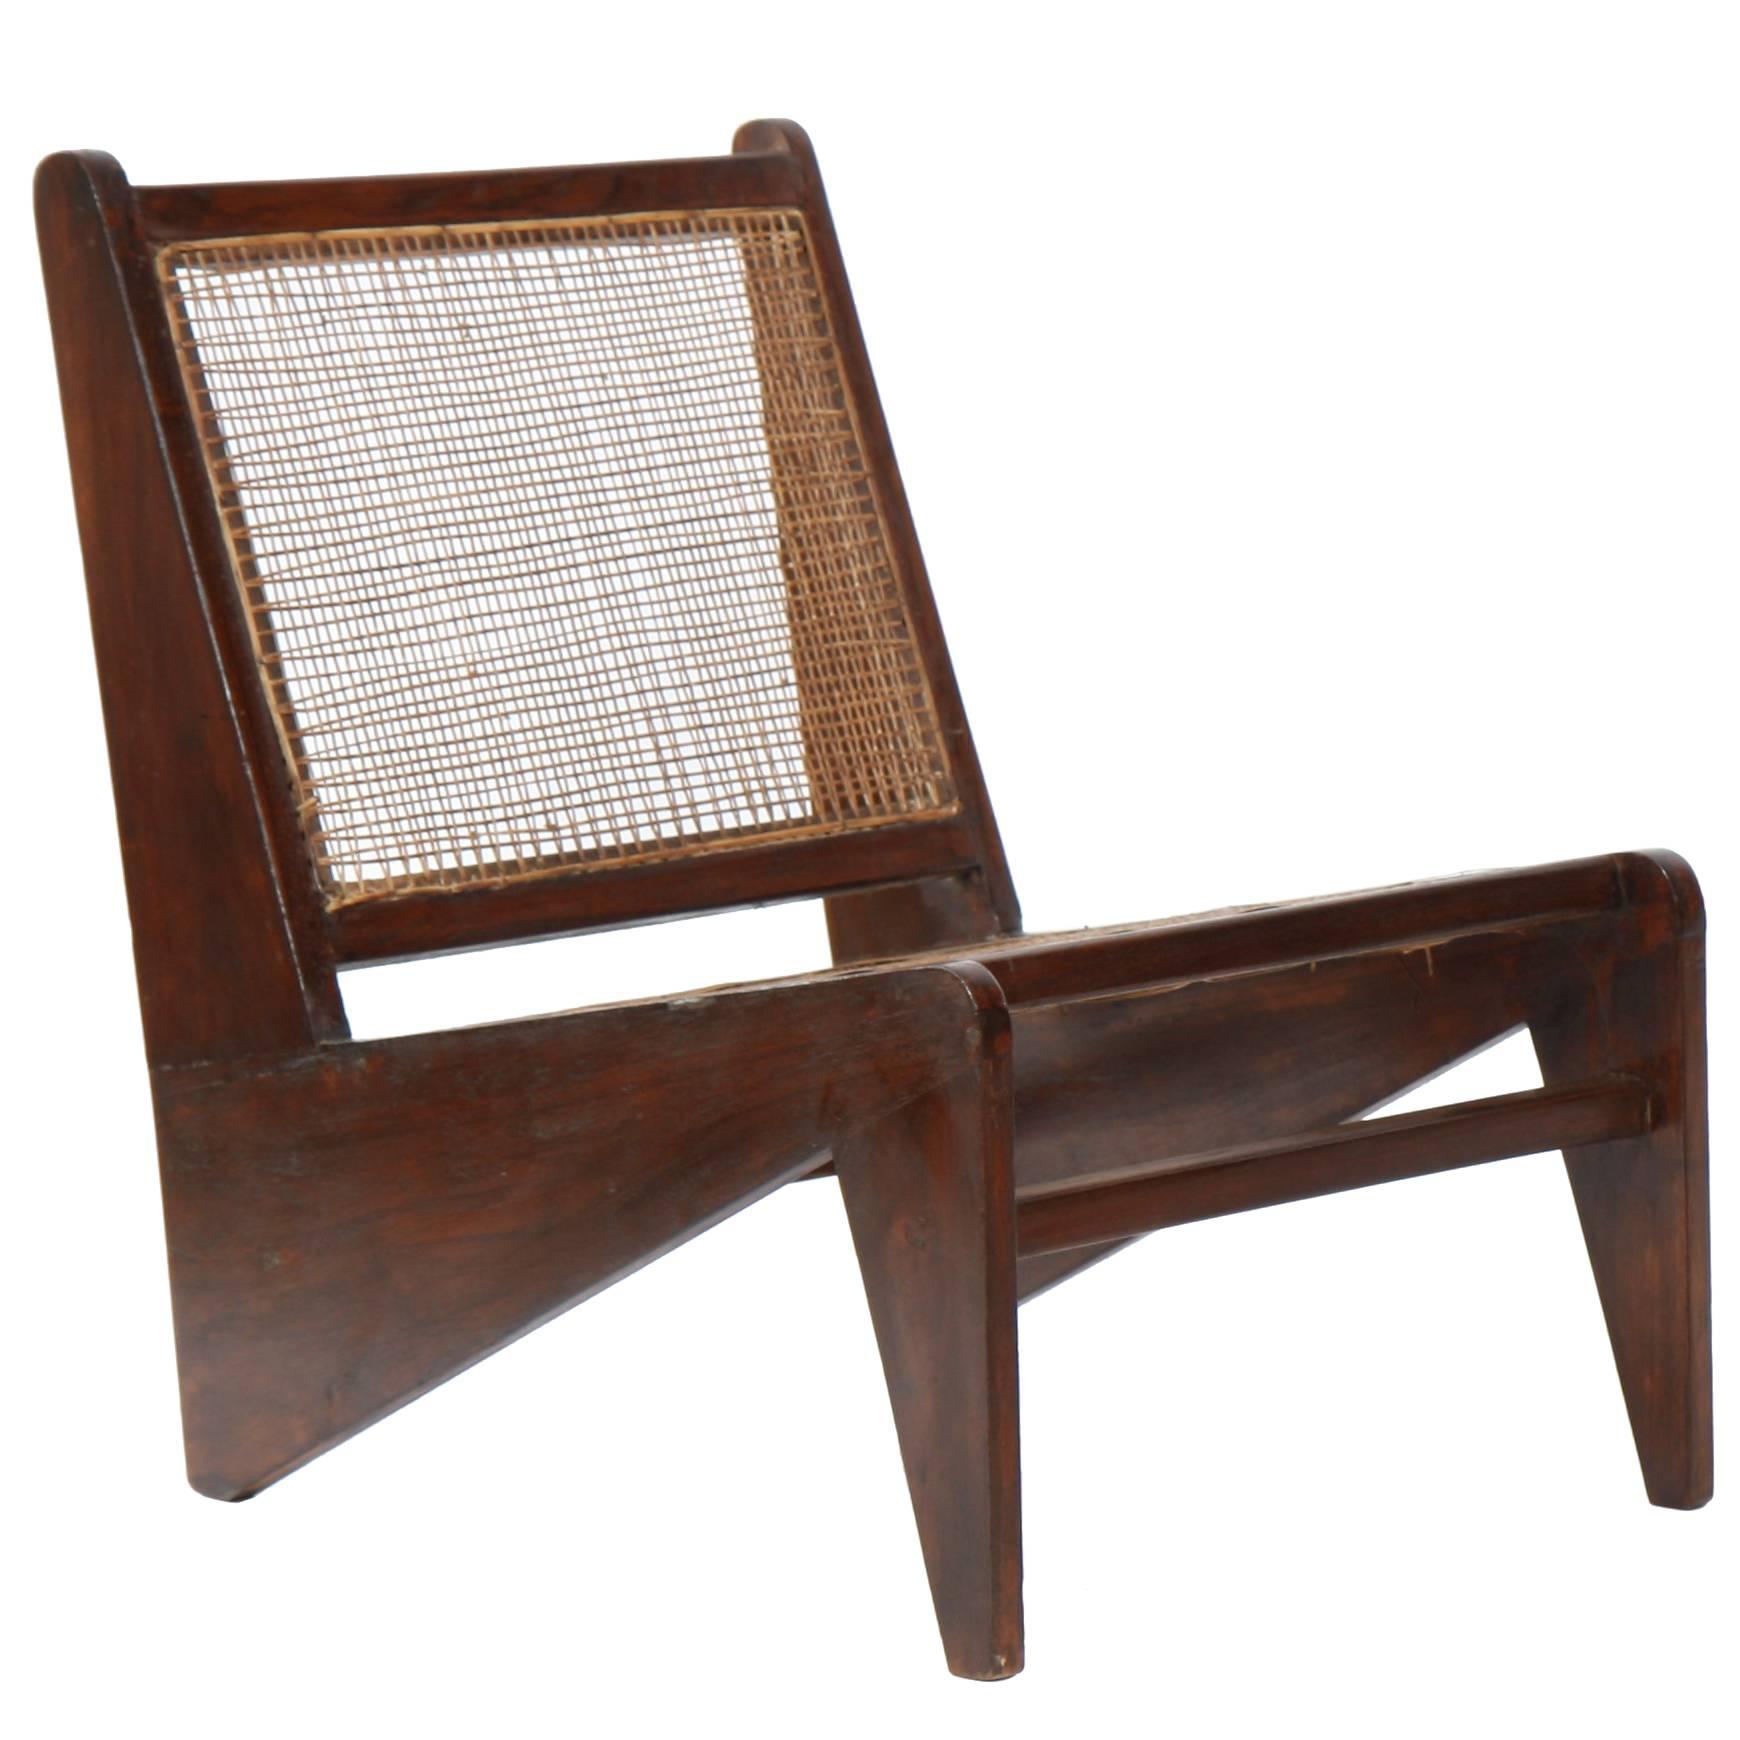 Rare and Exceptional Low Seat Called "Kangaroo" Pierre Jeanneret